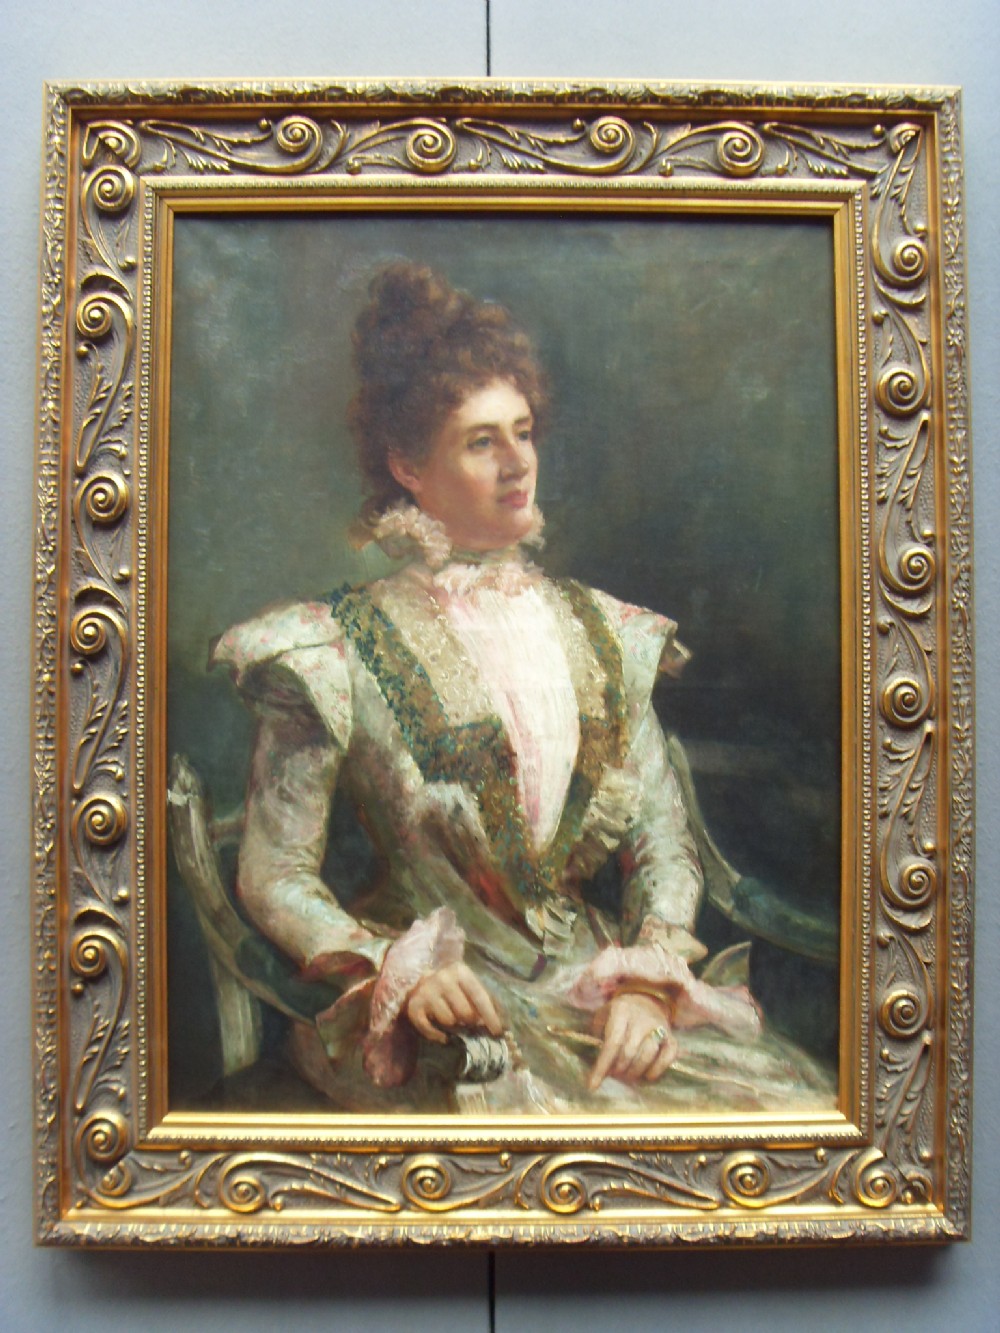 oil portrait of grande french lady la belle epoque period in gallery frame 40 x 32 inches